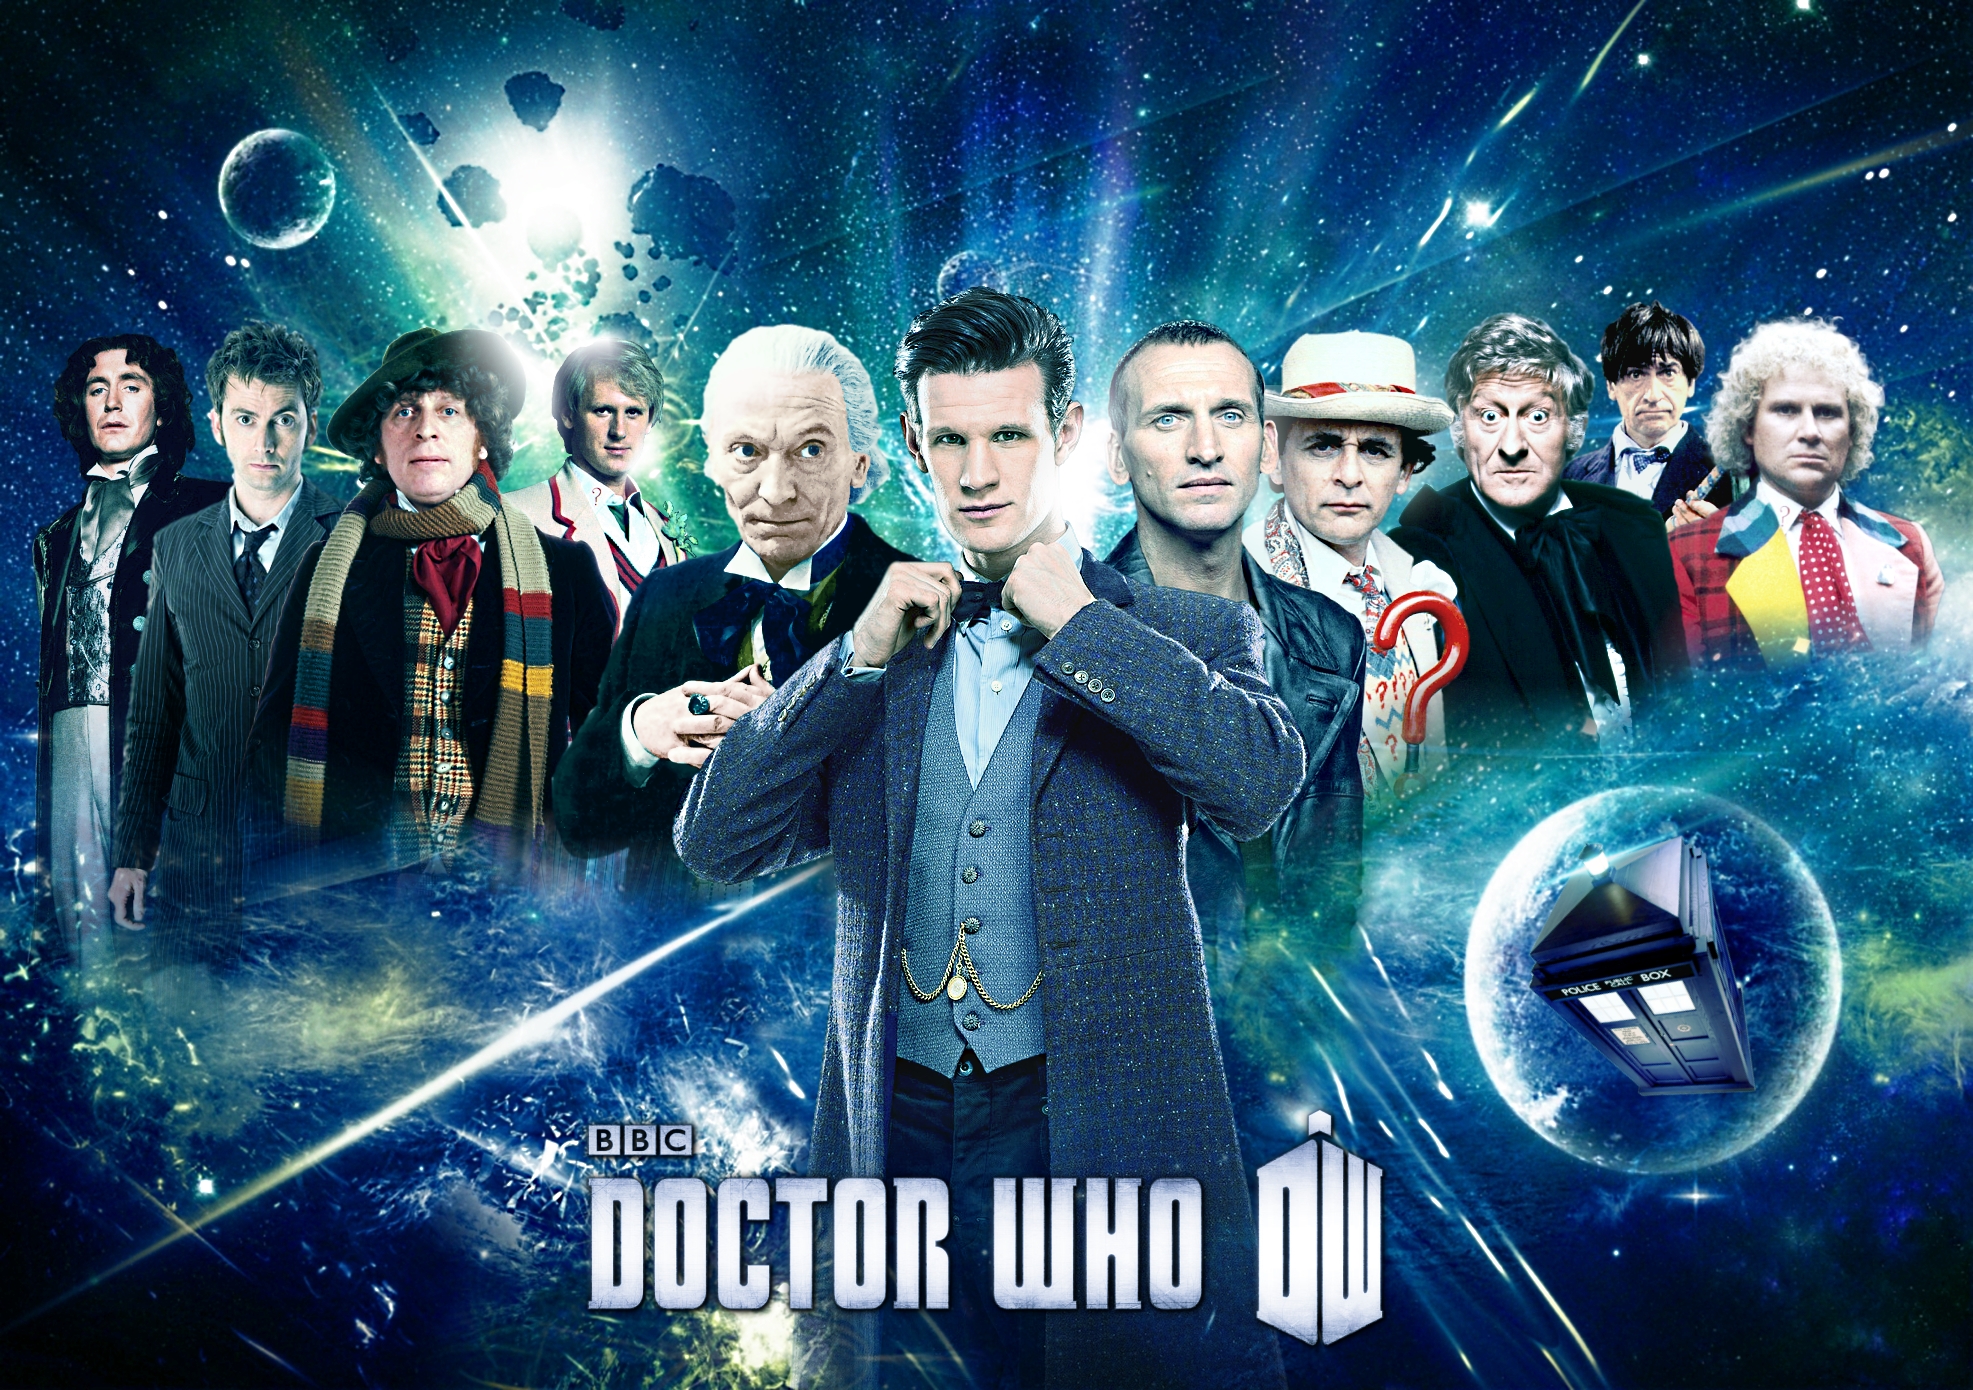 Doctor Who Eleven Doctors Poster By Disneydoctorwhosly23 On